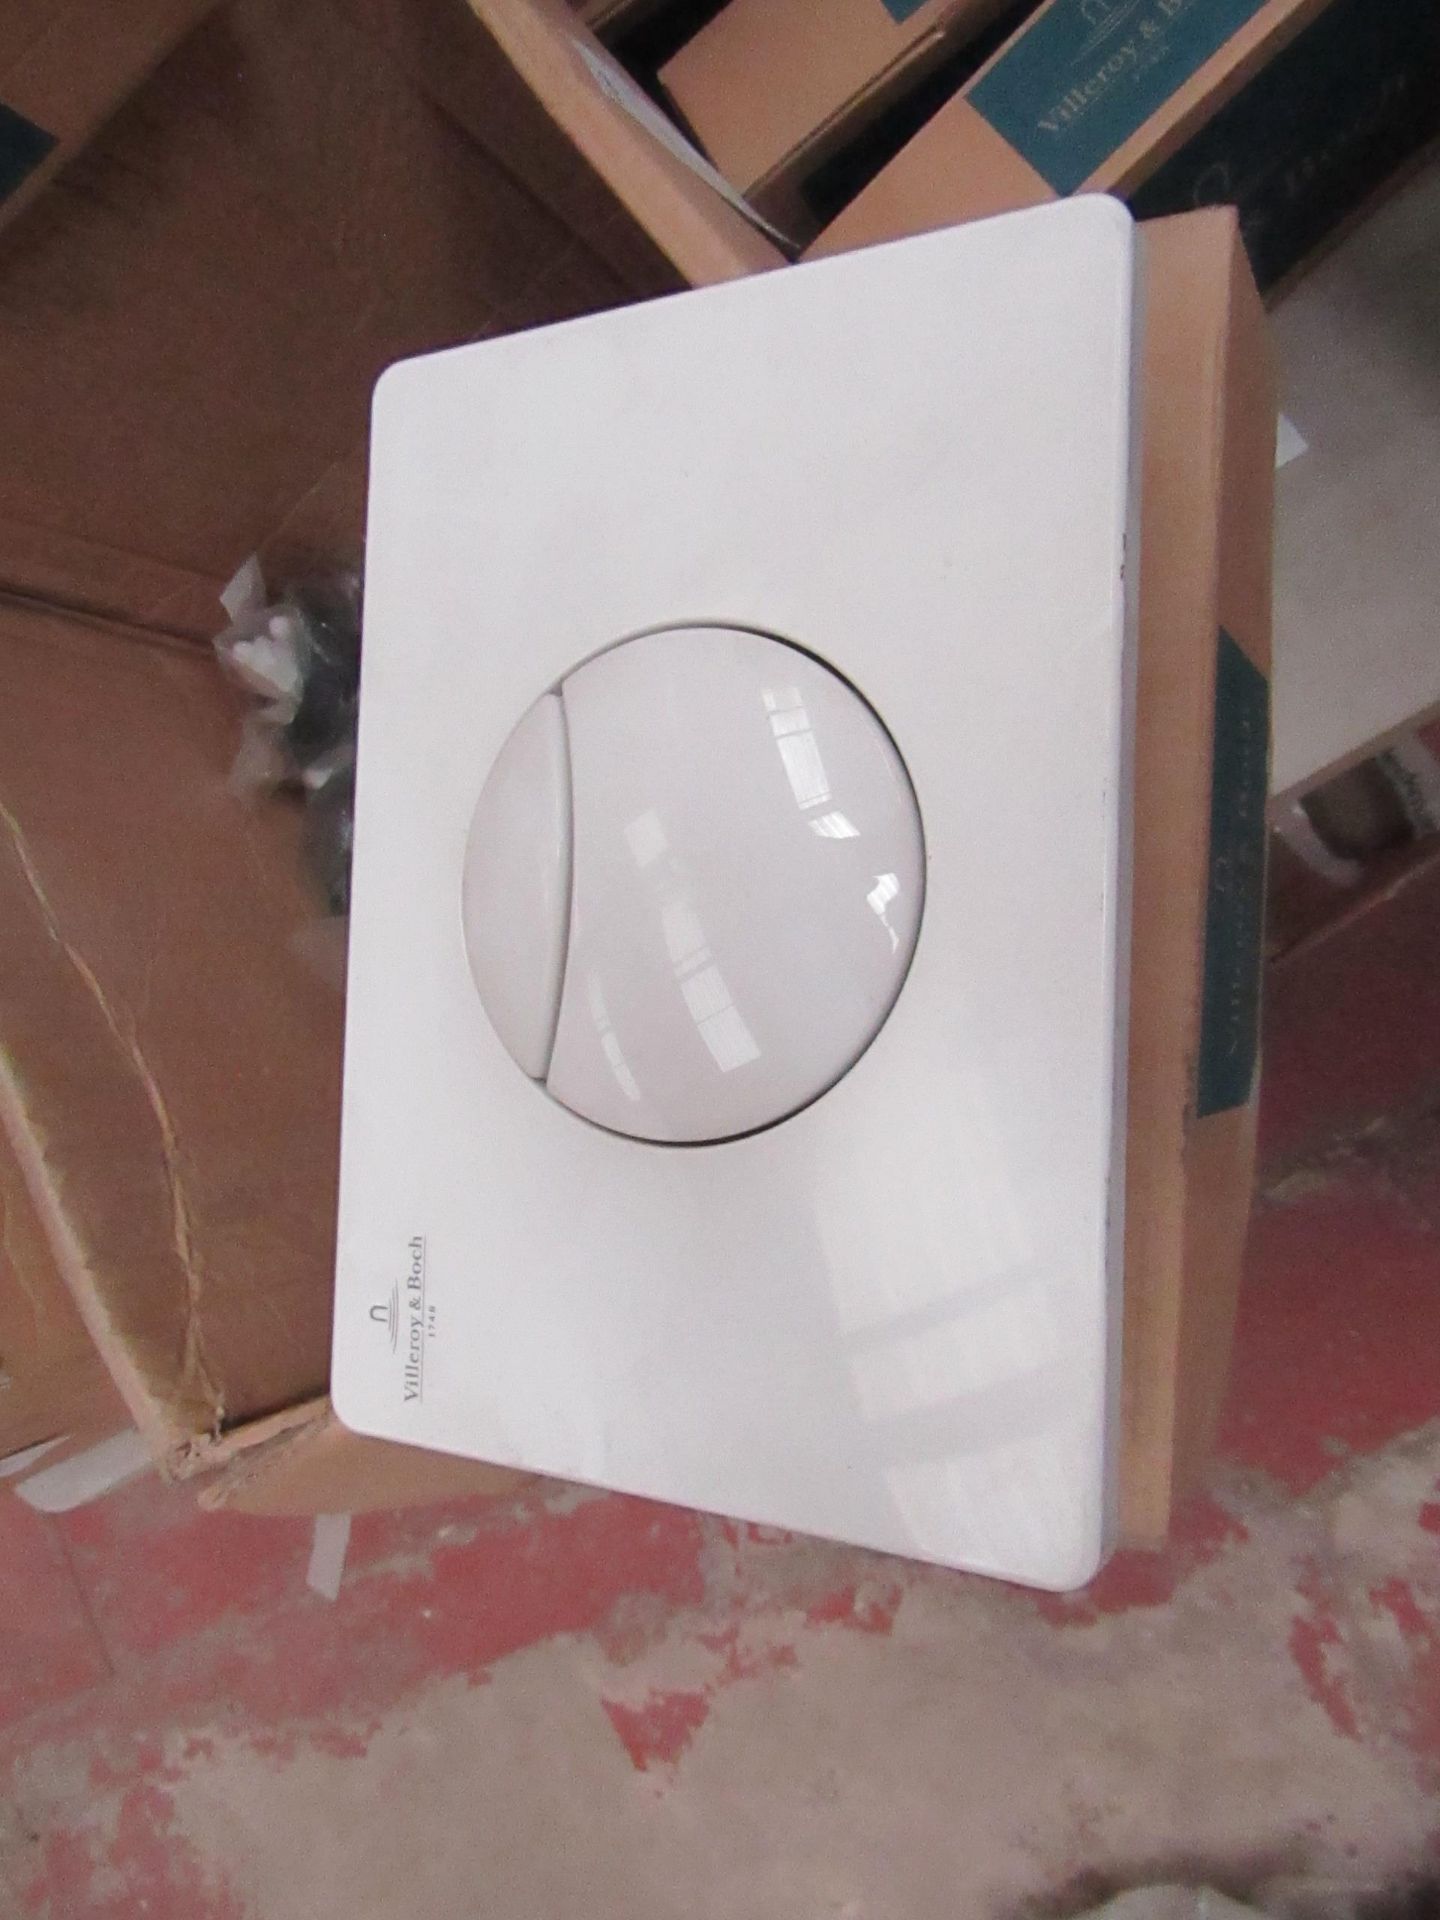 Villeroy and Boch flush plate, new and boxed.